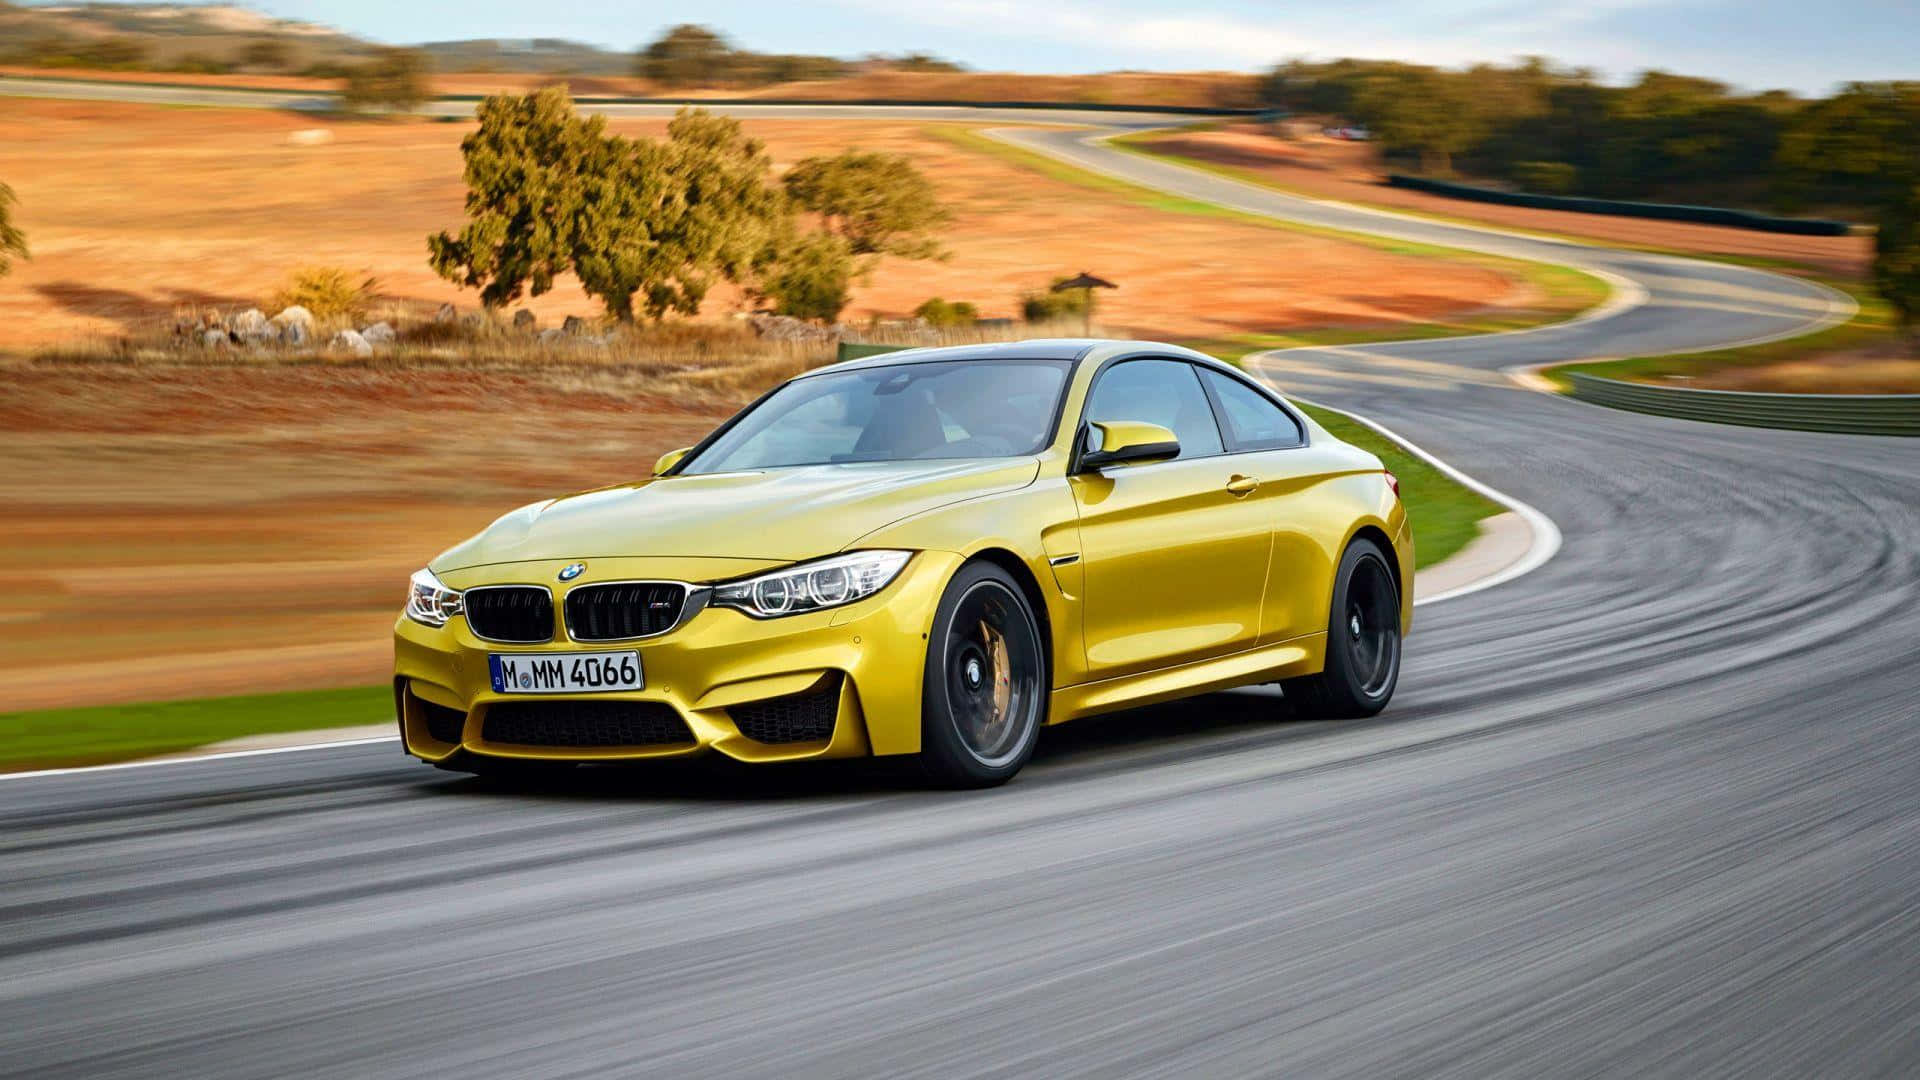 1920x1080 BMW Golden M4 Curved Road Wallpaper